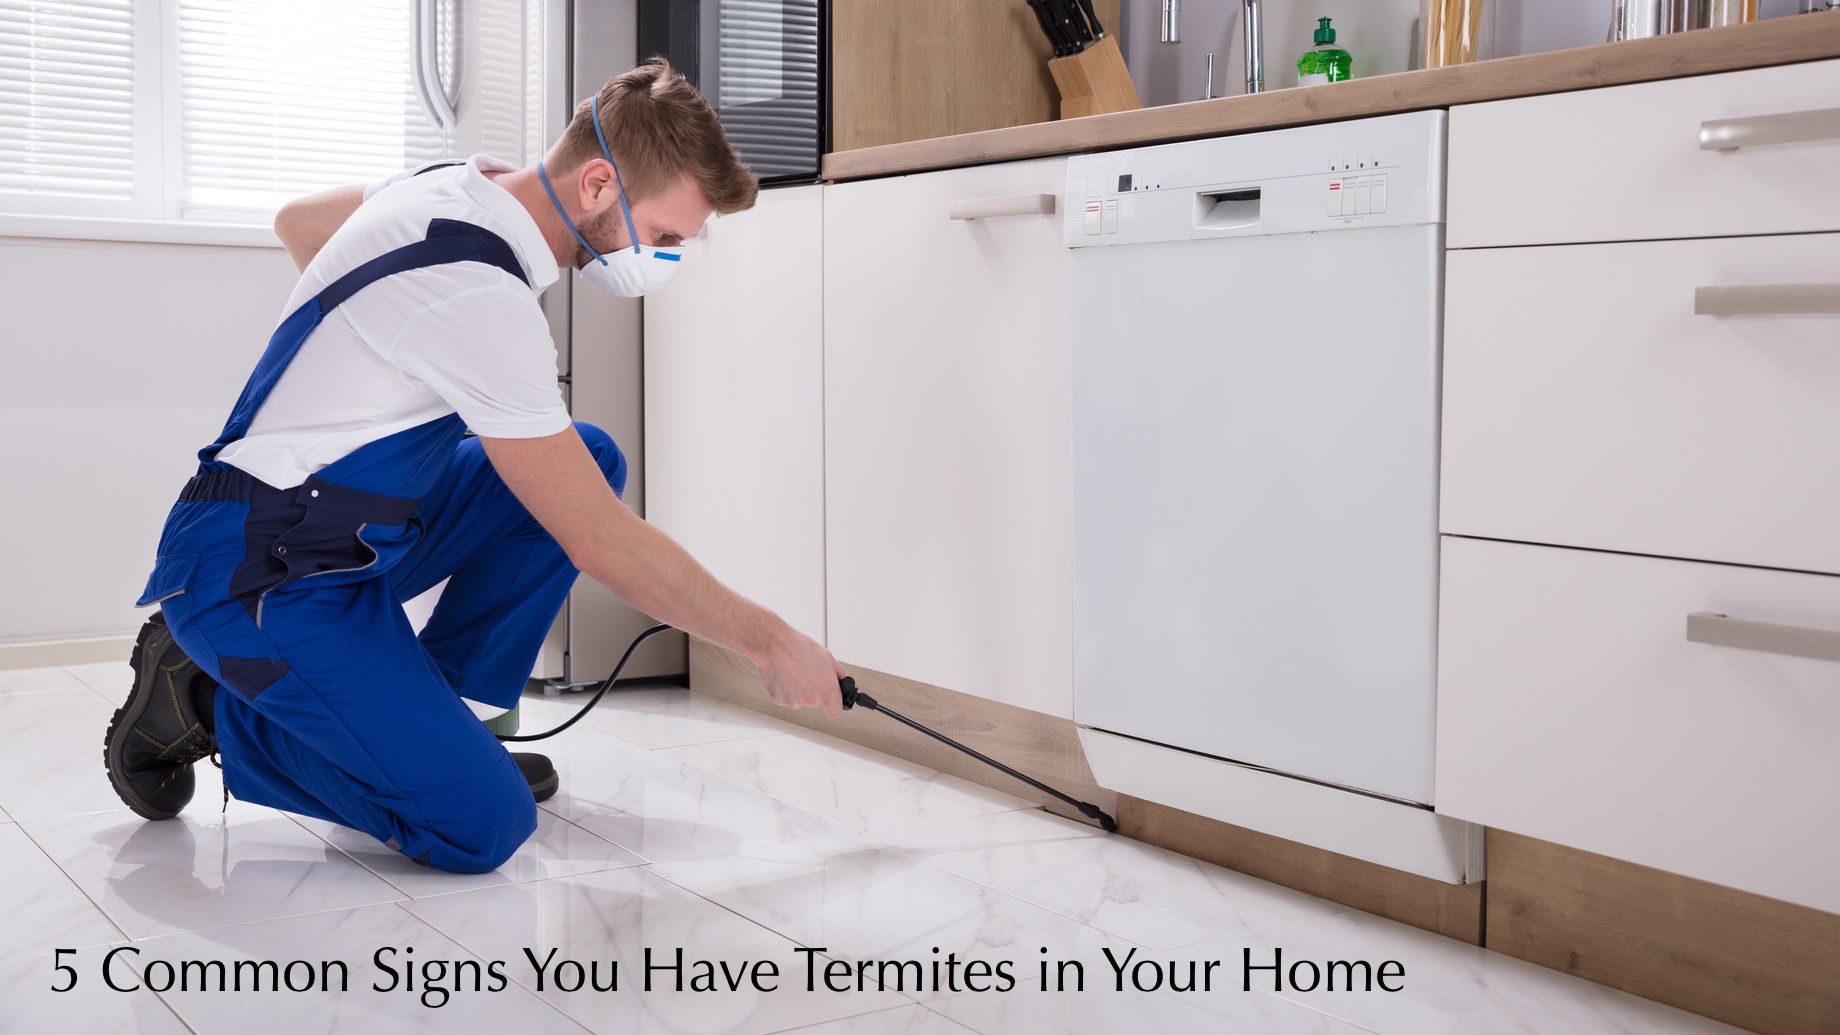 5 Common Signs You Have Termites in Your Home